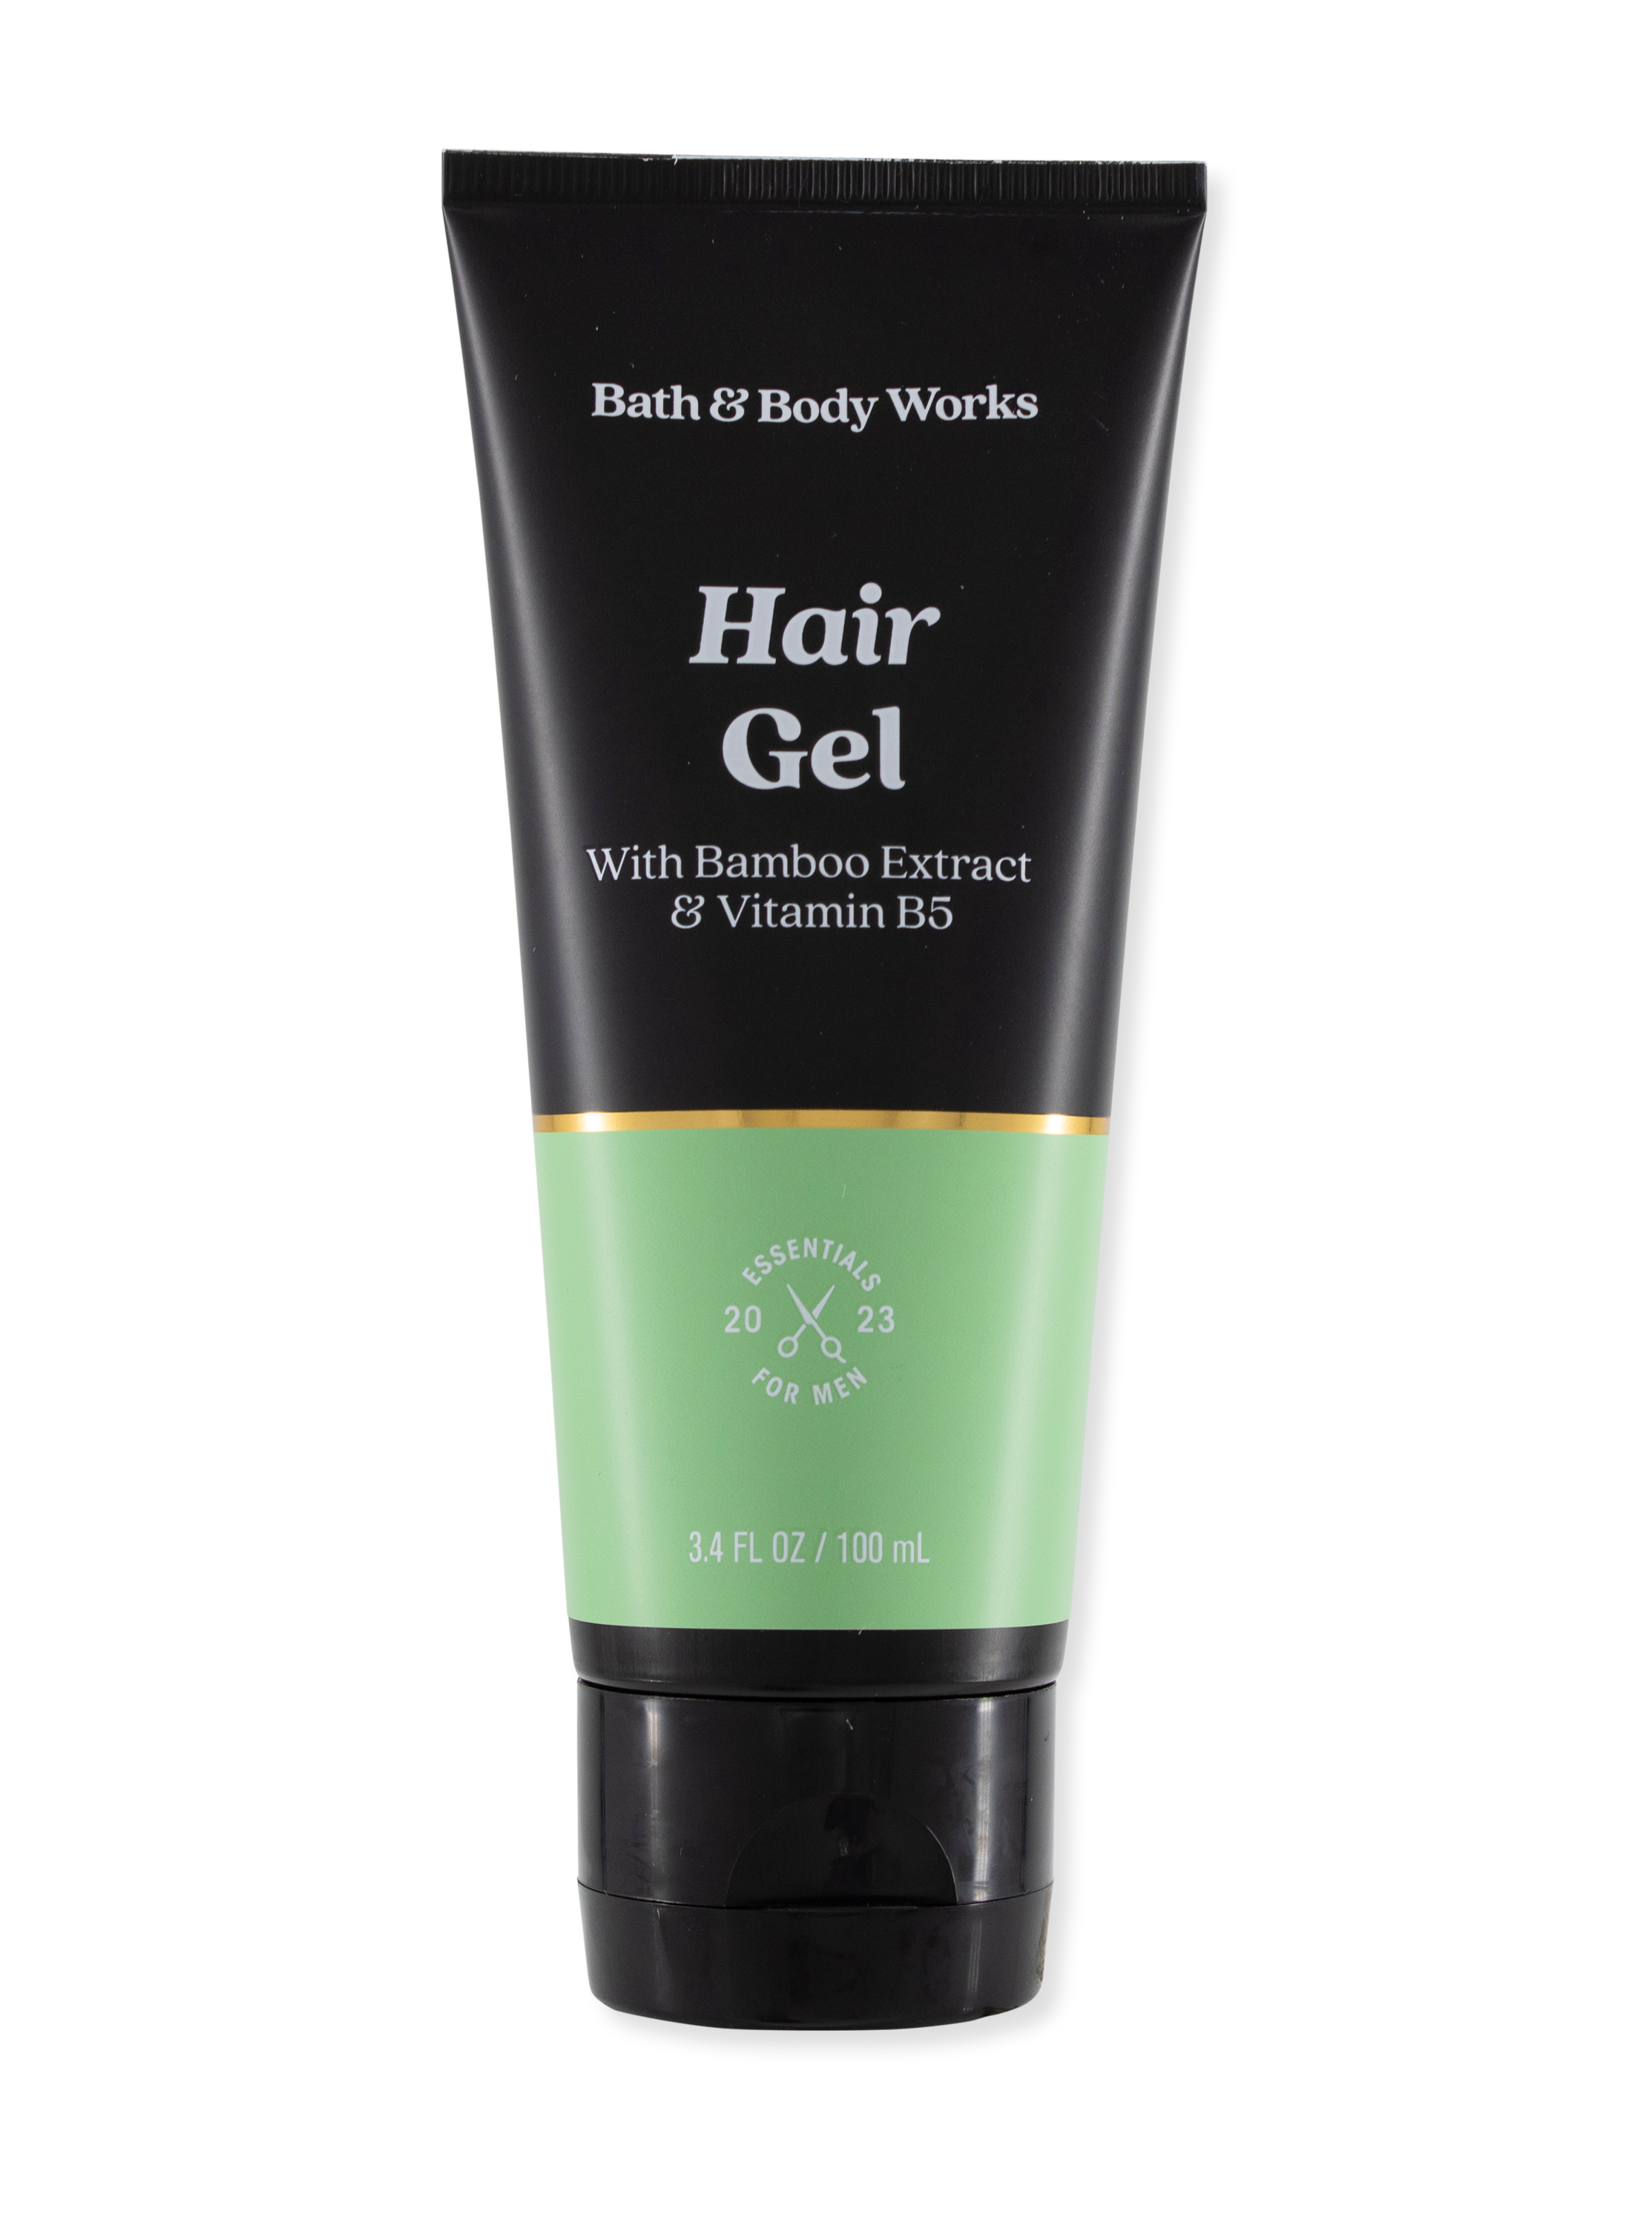 Hair gel with bamboo extract & vitamin B5 - for men - 100ml